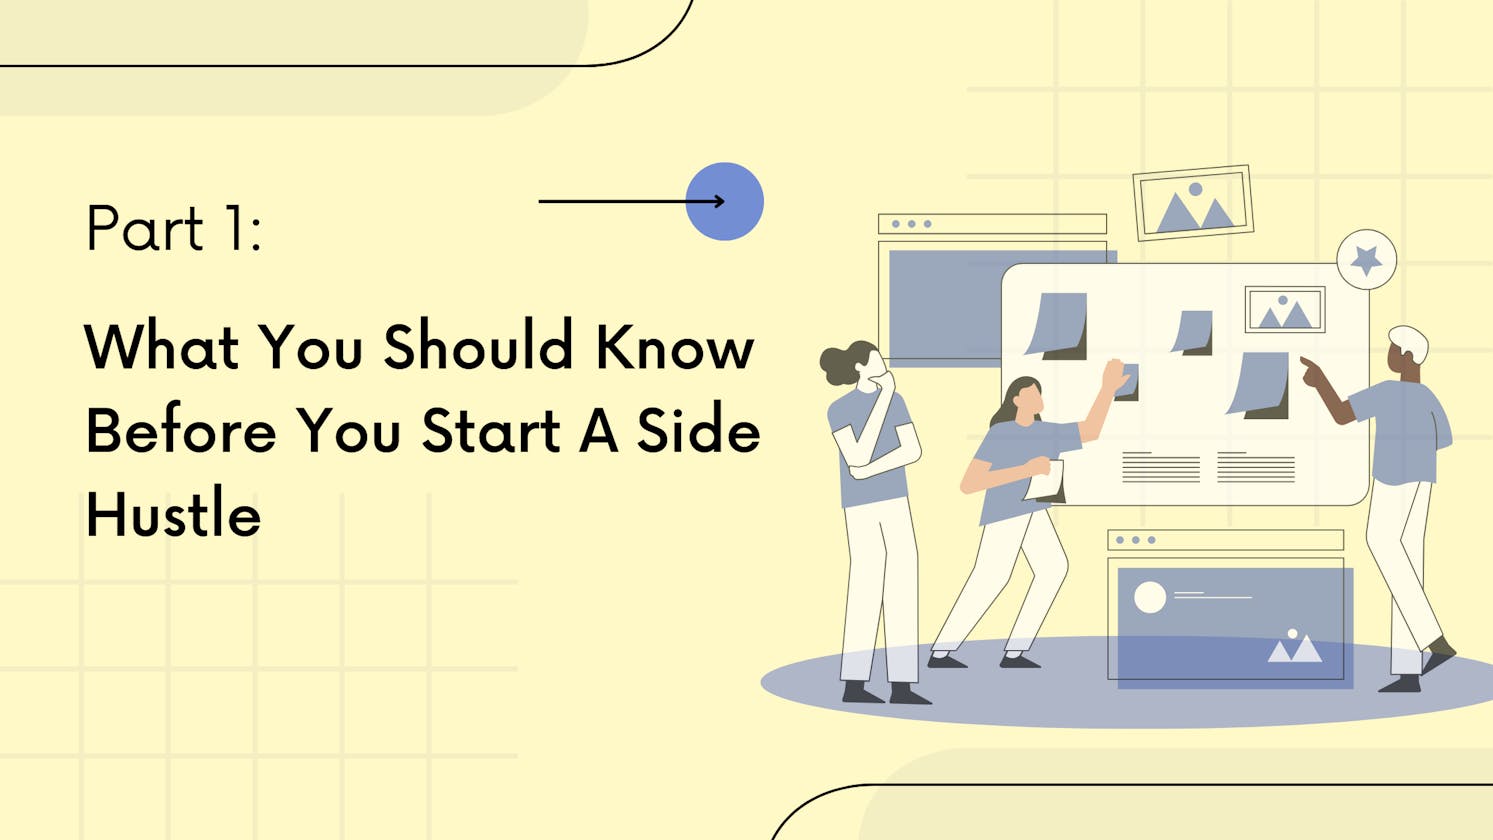 What You Should Know Before You Start A Side Hustle